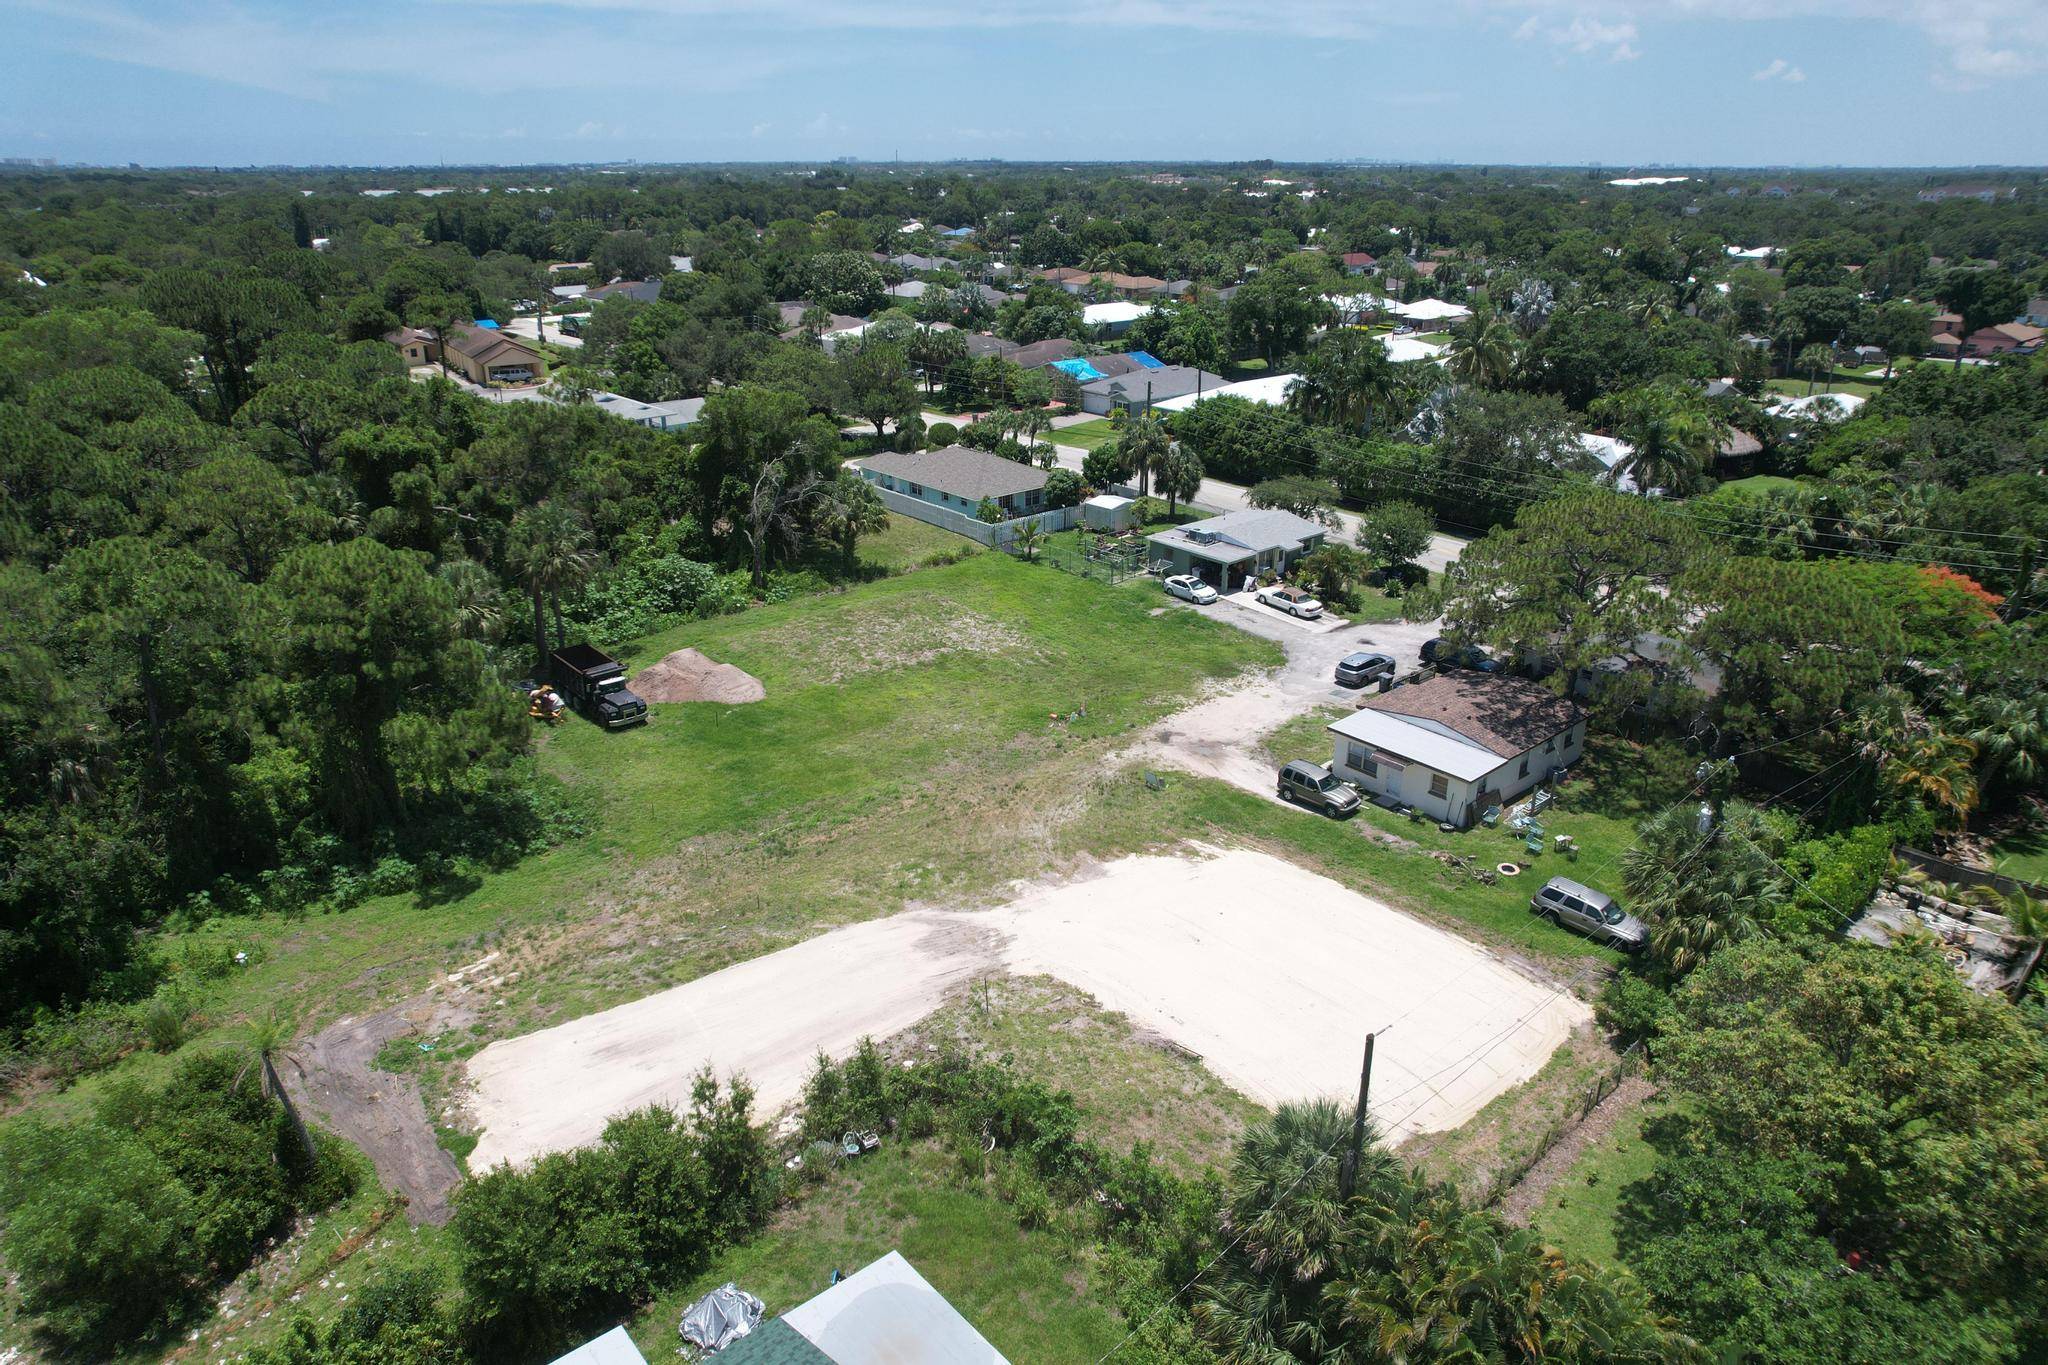 RARE FIND. 2 LOTS EAST OF I95 IN THE HEART OF JUPITER.